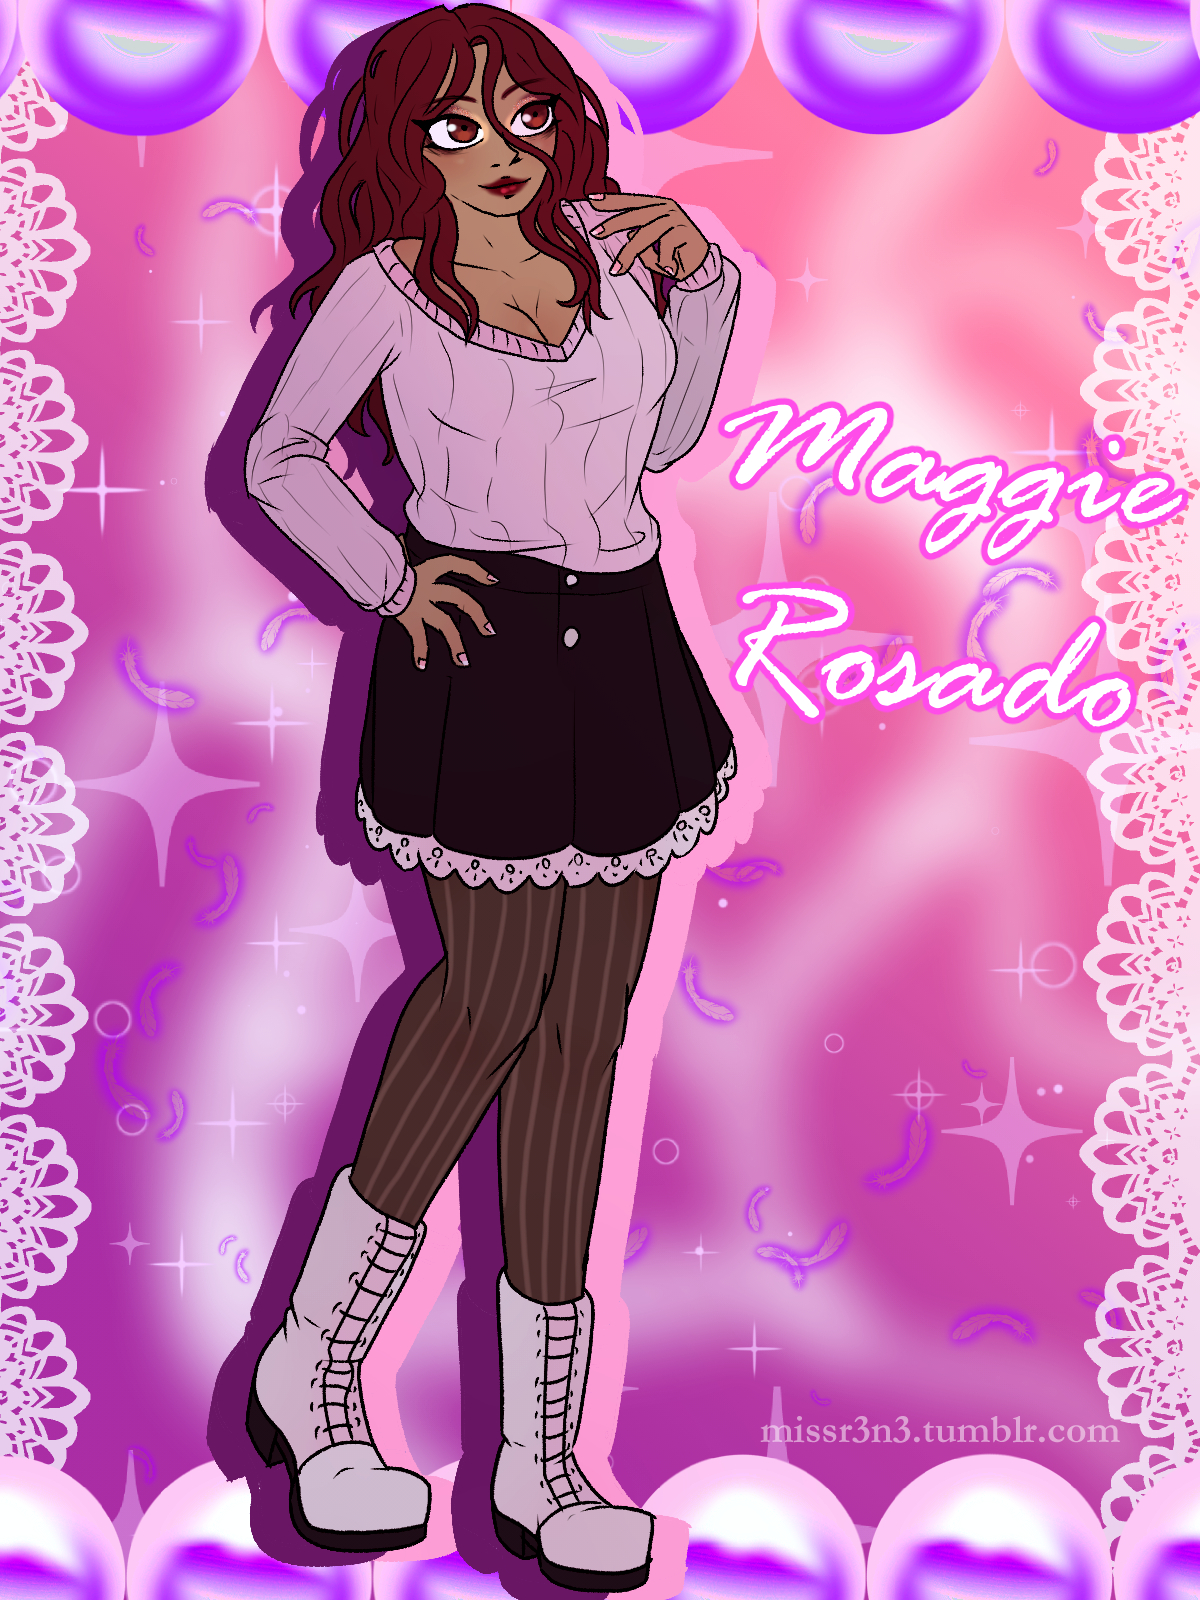 a young woman with a preppy fashion sense in front of a pastel pink, y2k style background. cursive text beside the woman reads 'Maggie Rosado'